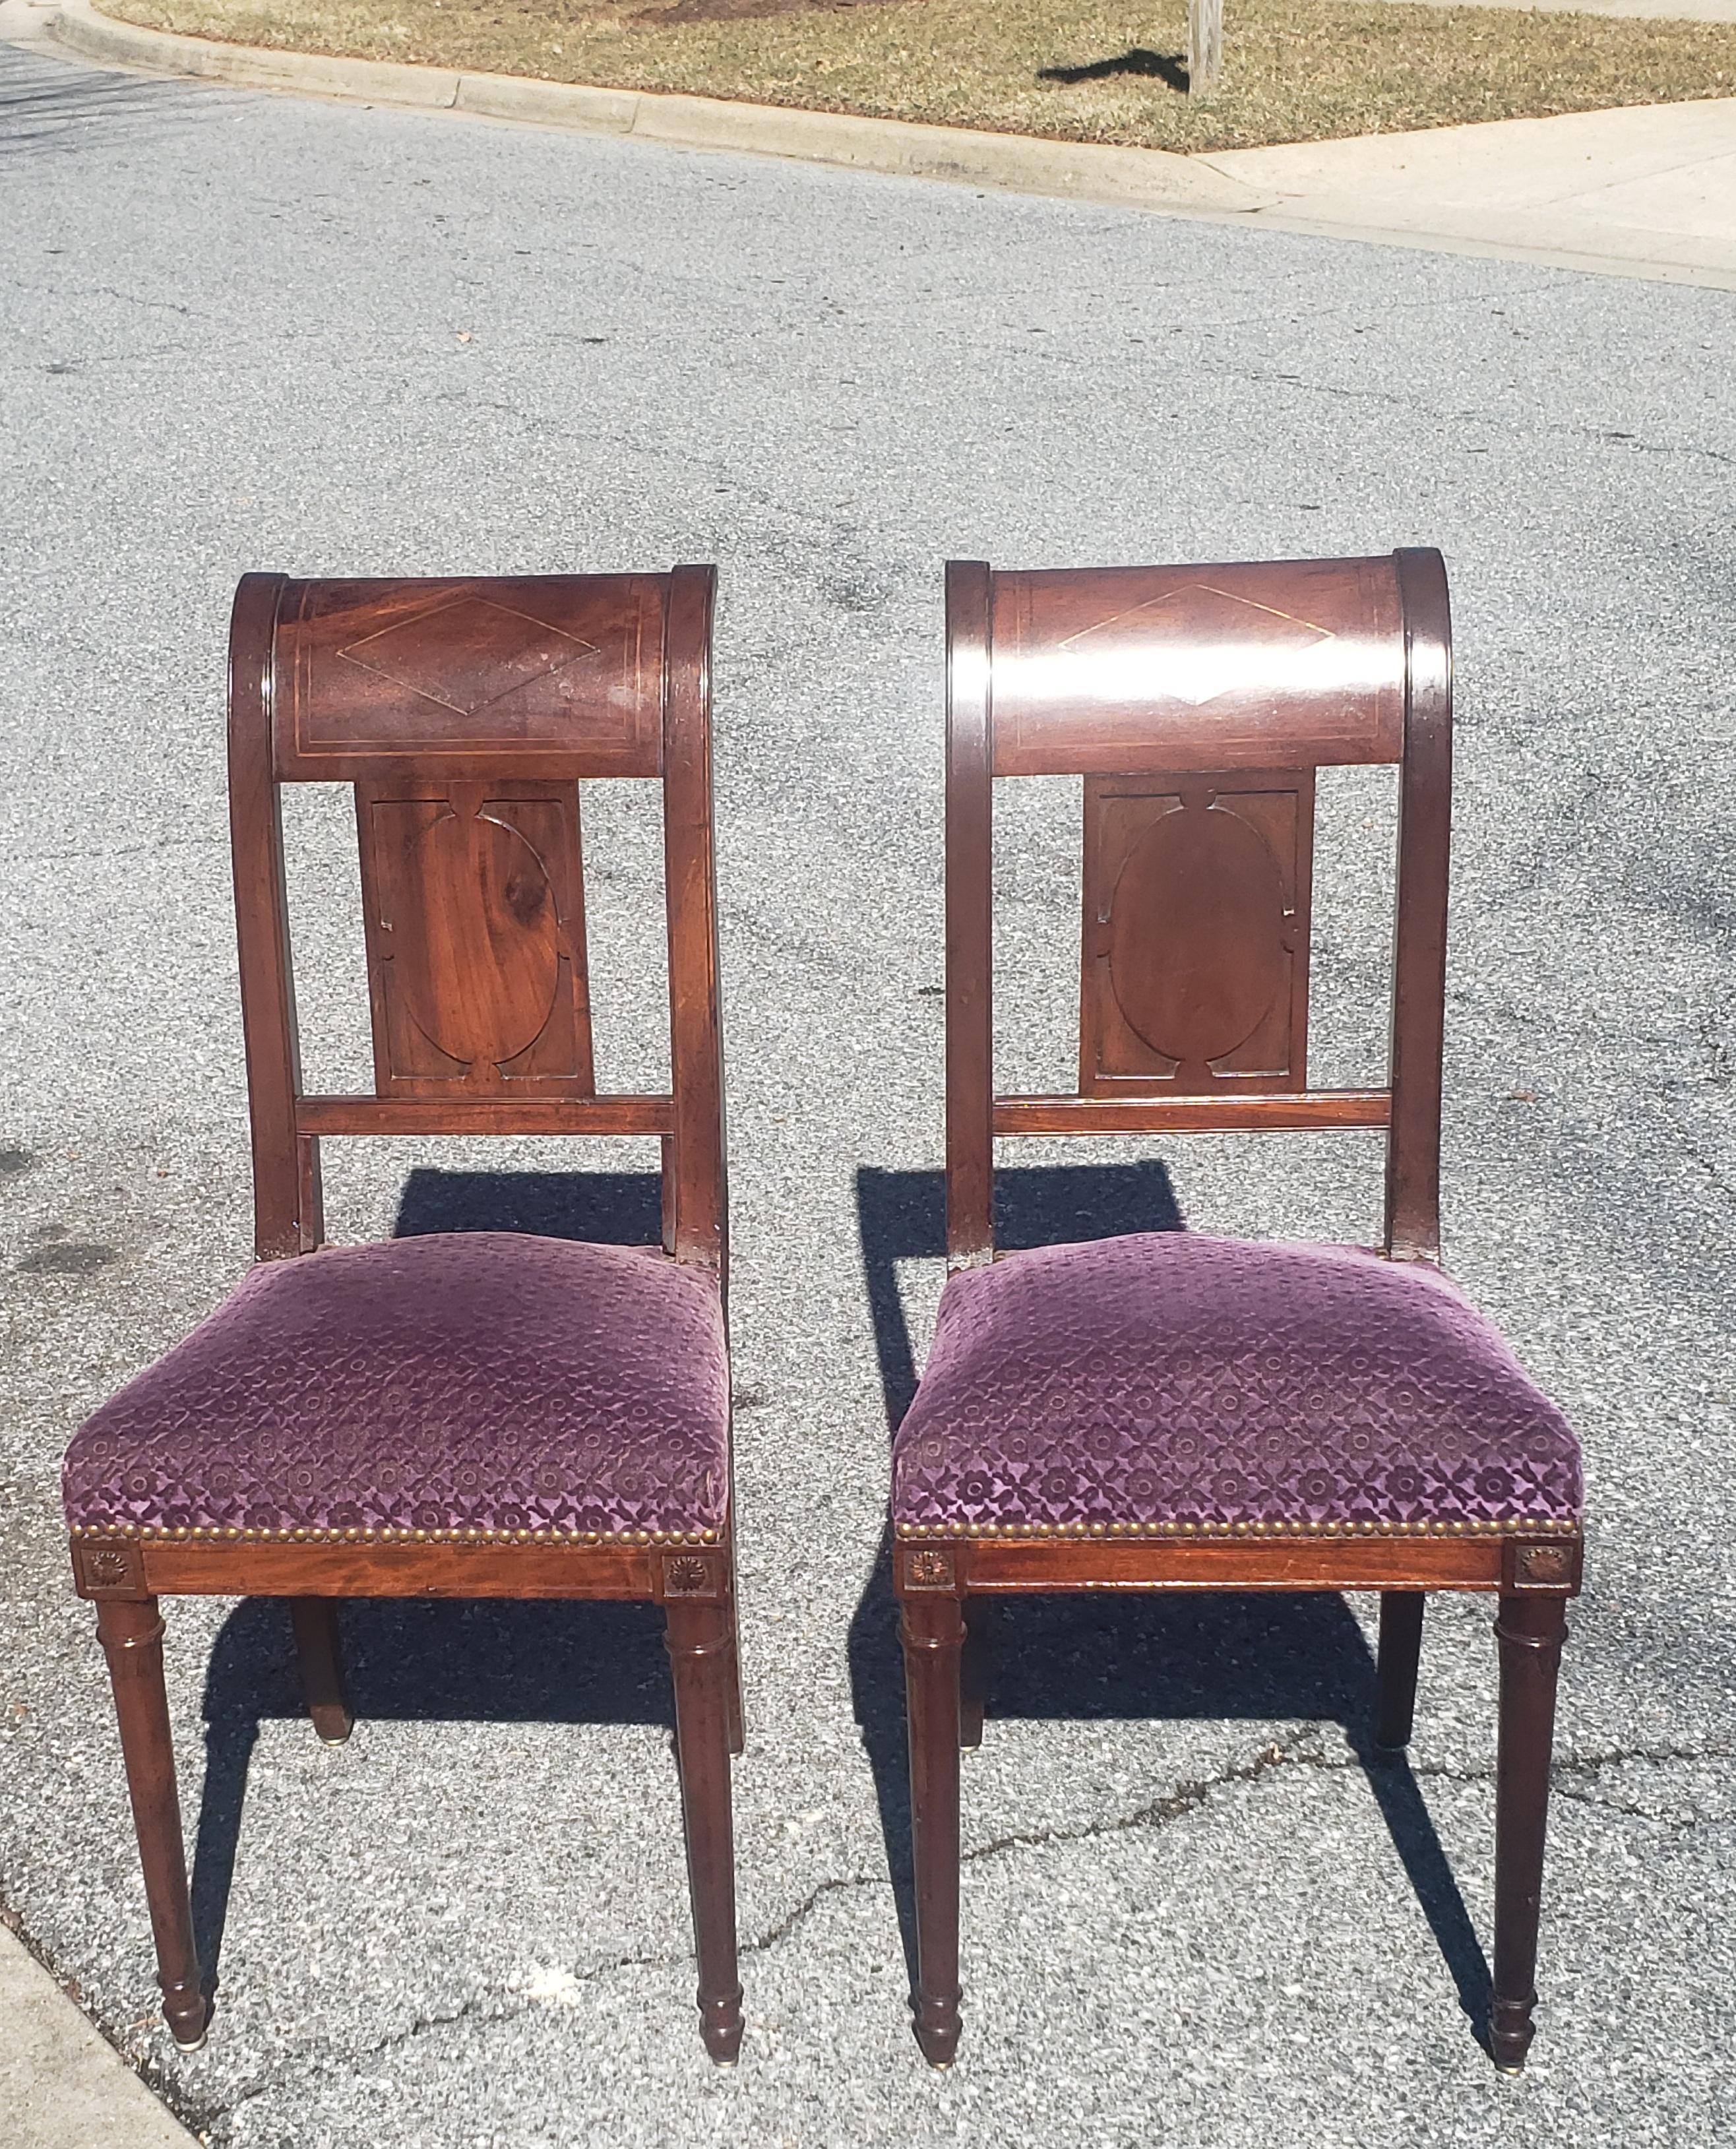 A rare pair of Continental Mahogany and brass inlay upholstered side chairs attributed to the famous French cabinet maker Georges Jacob. Very firm, reupholstered seats with springs. We have a total of 4 in our inventory, two separatedly listed as